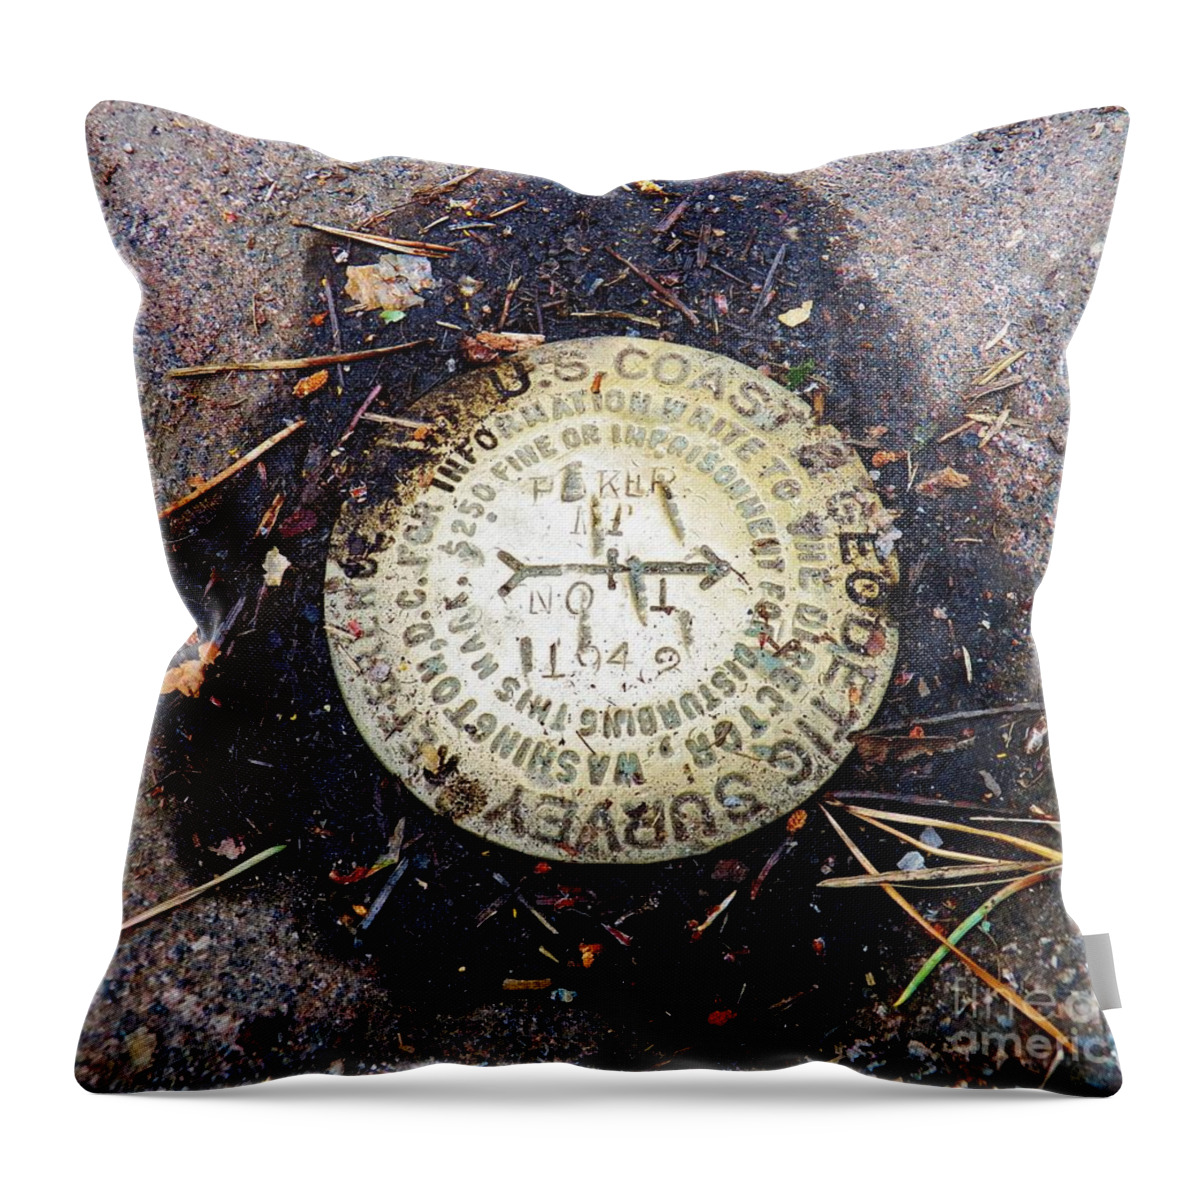 Geodetic Survey Throw Pillow featuring the photograph Adirondack Mountaintop Marker by Judy Via-Wolff